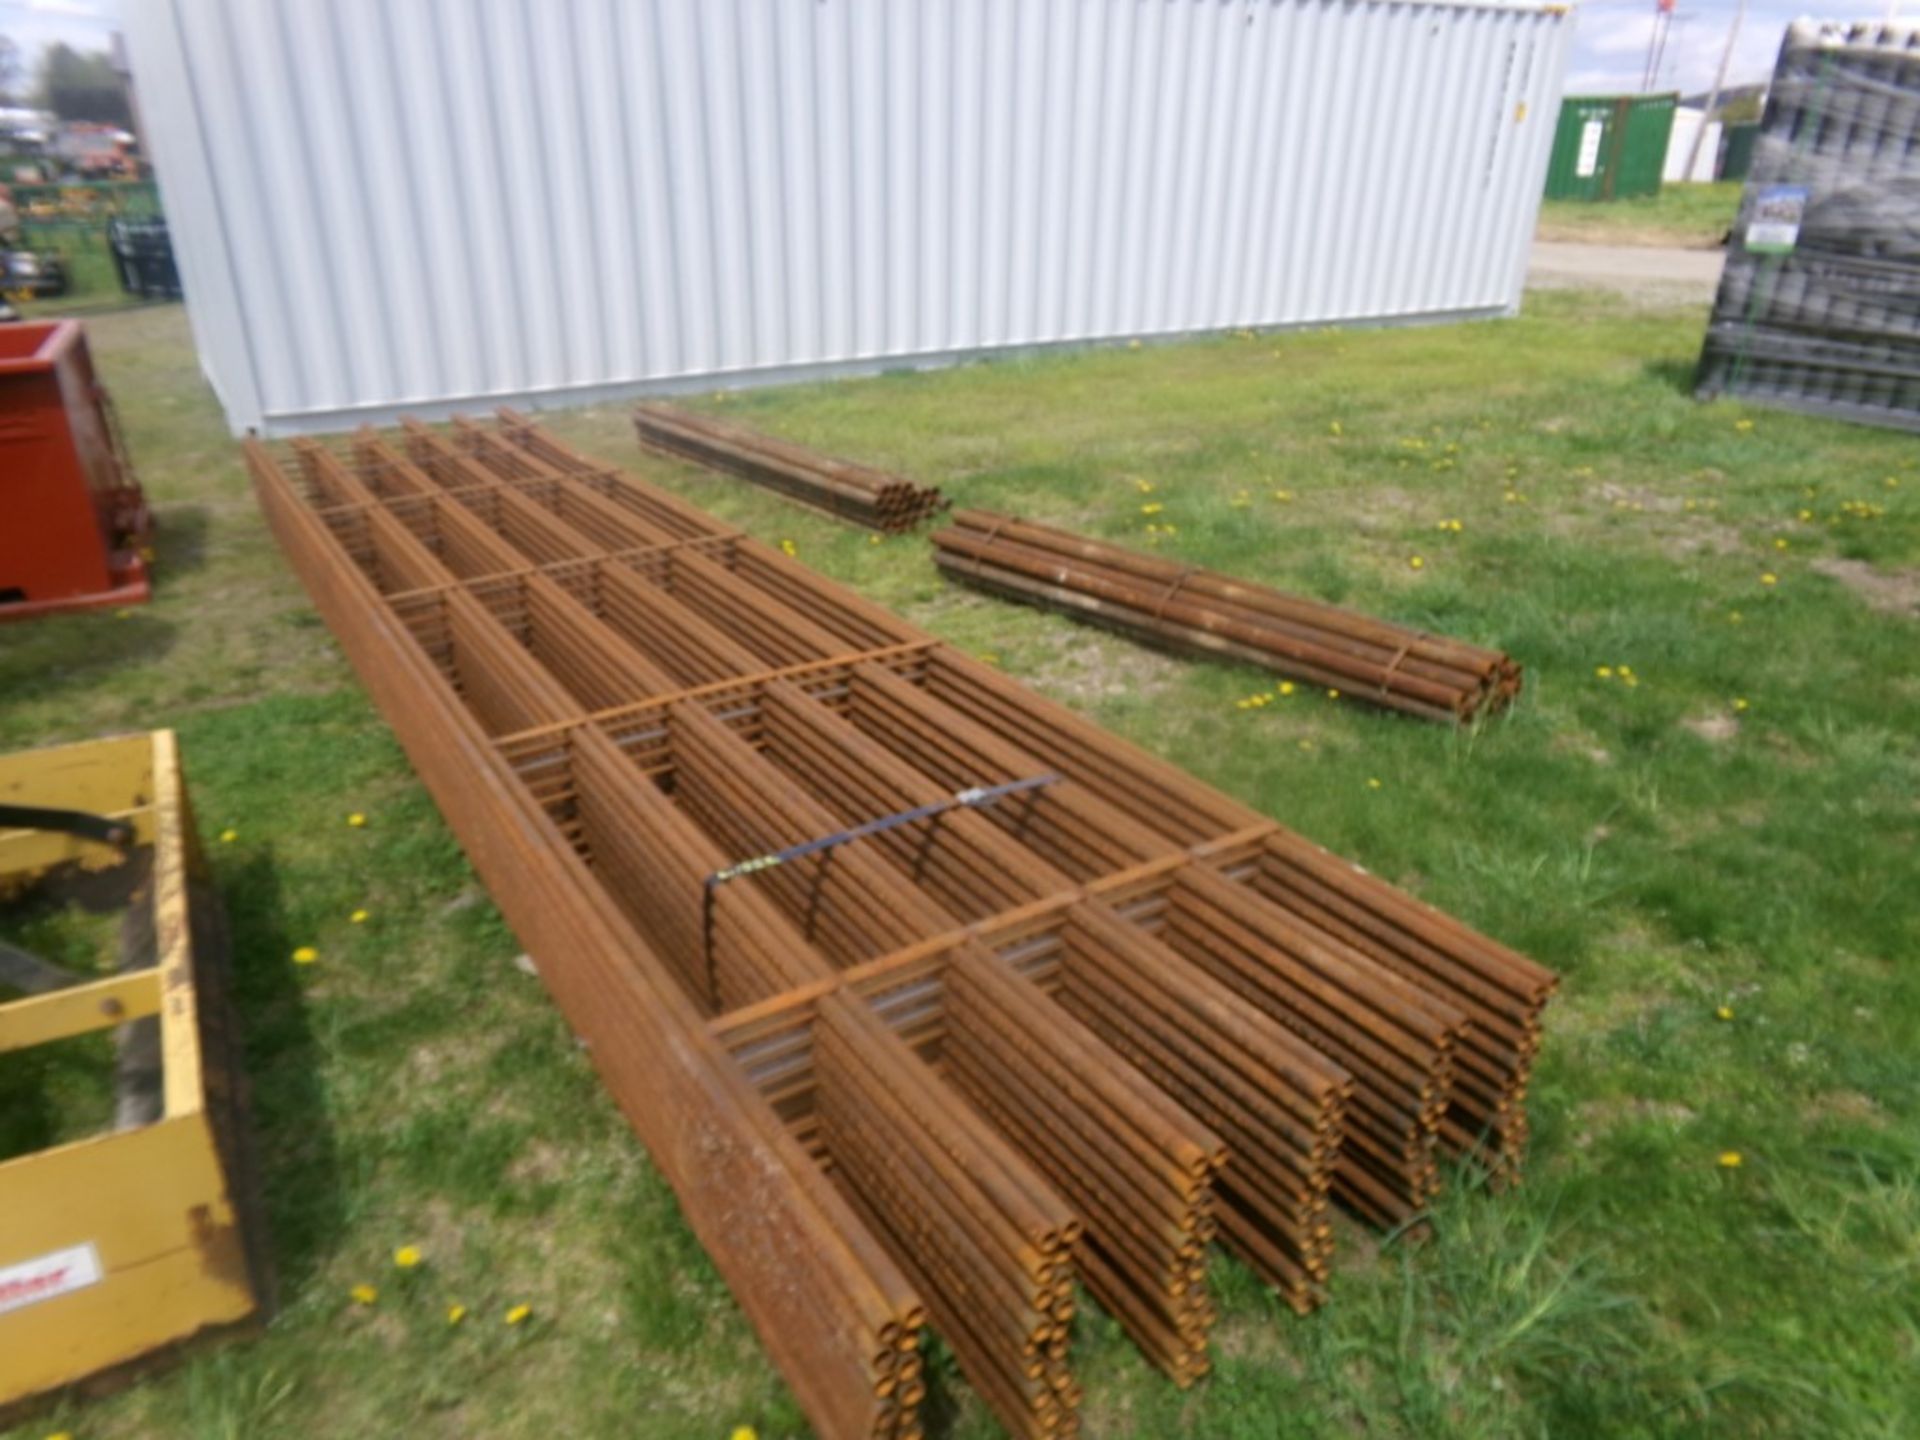 (20) 24' Steel Fence Panels w/ (48) 8' Steel Posts - Sells As A Group (2 PANELS HAVE DAMAGE) (4426)